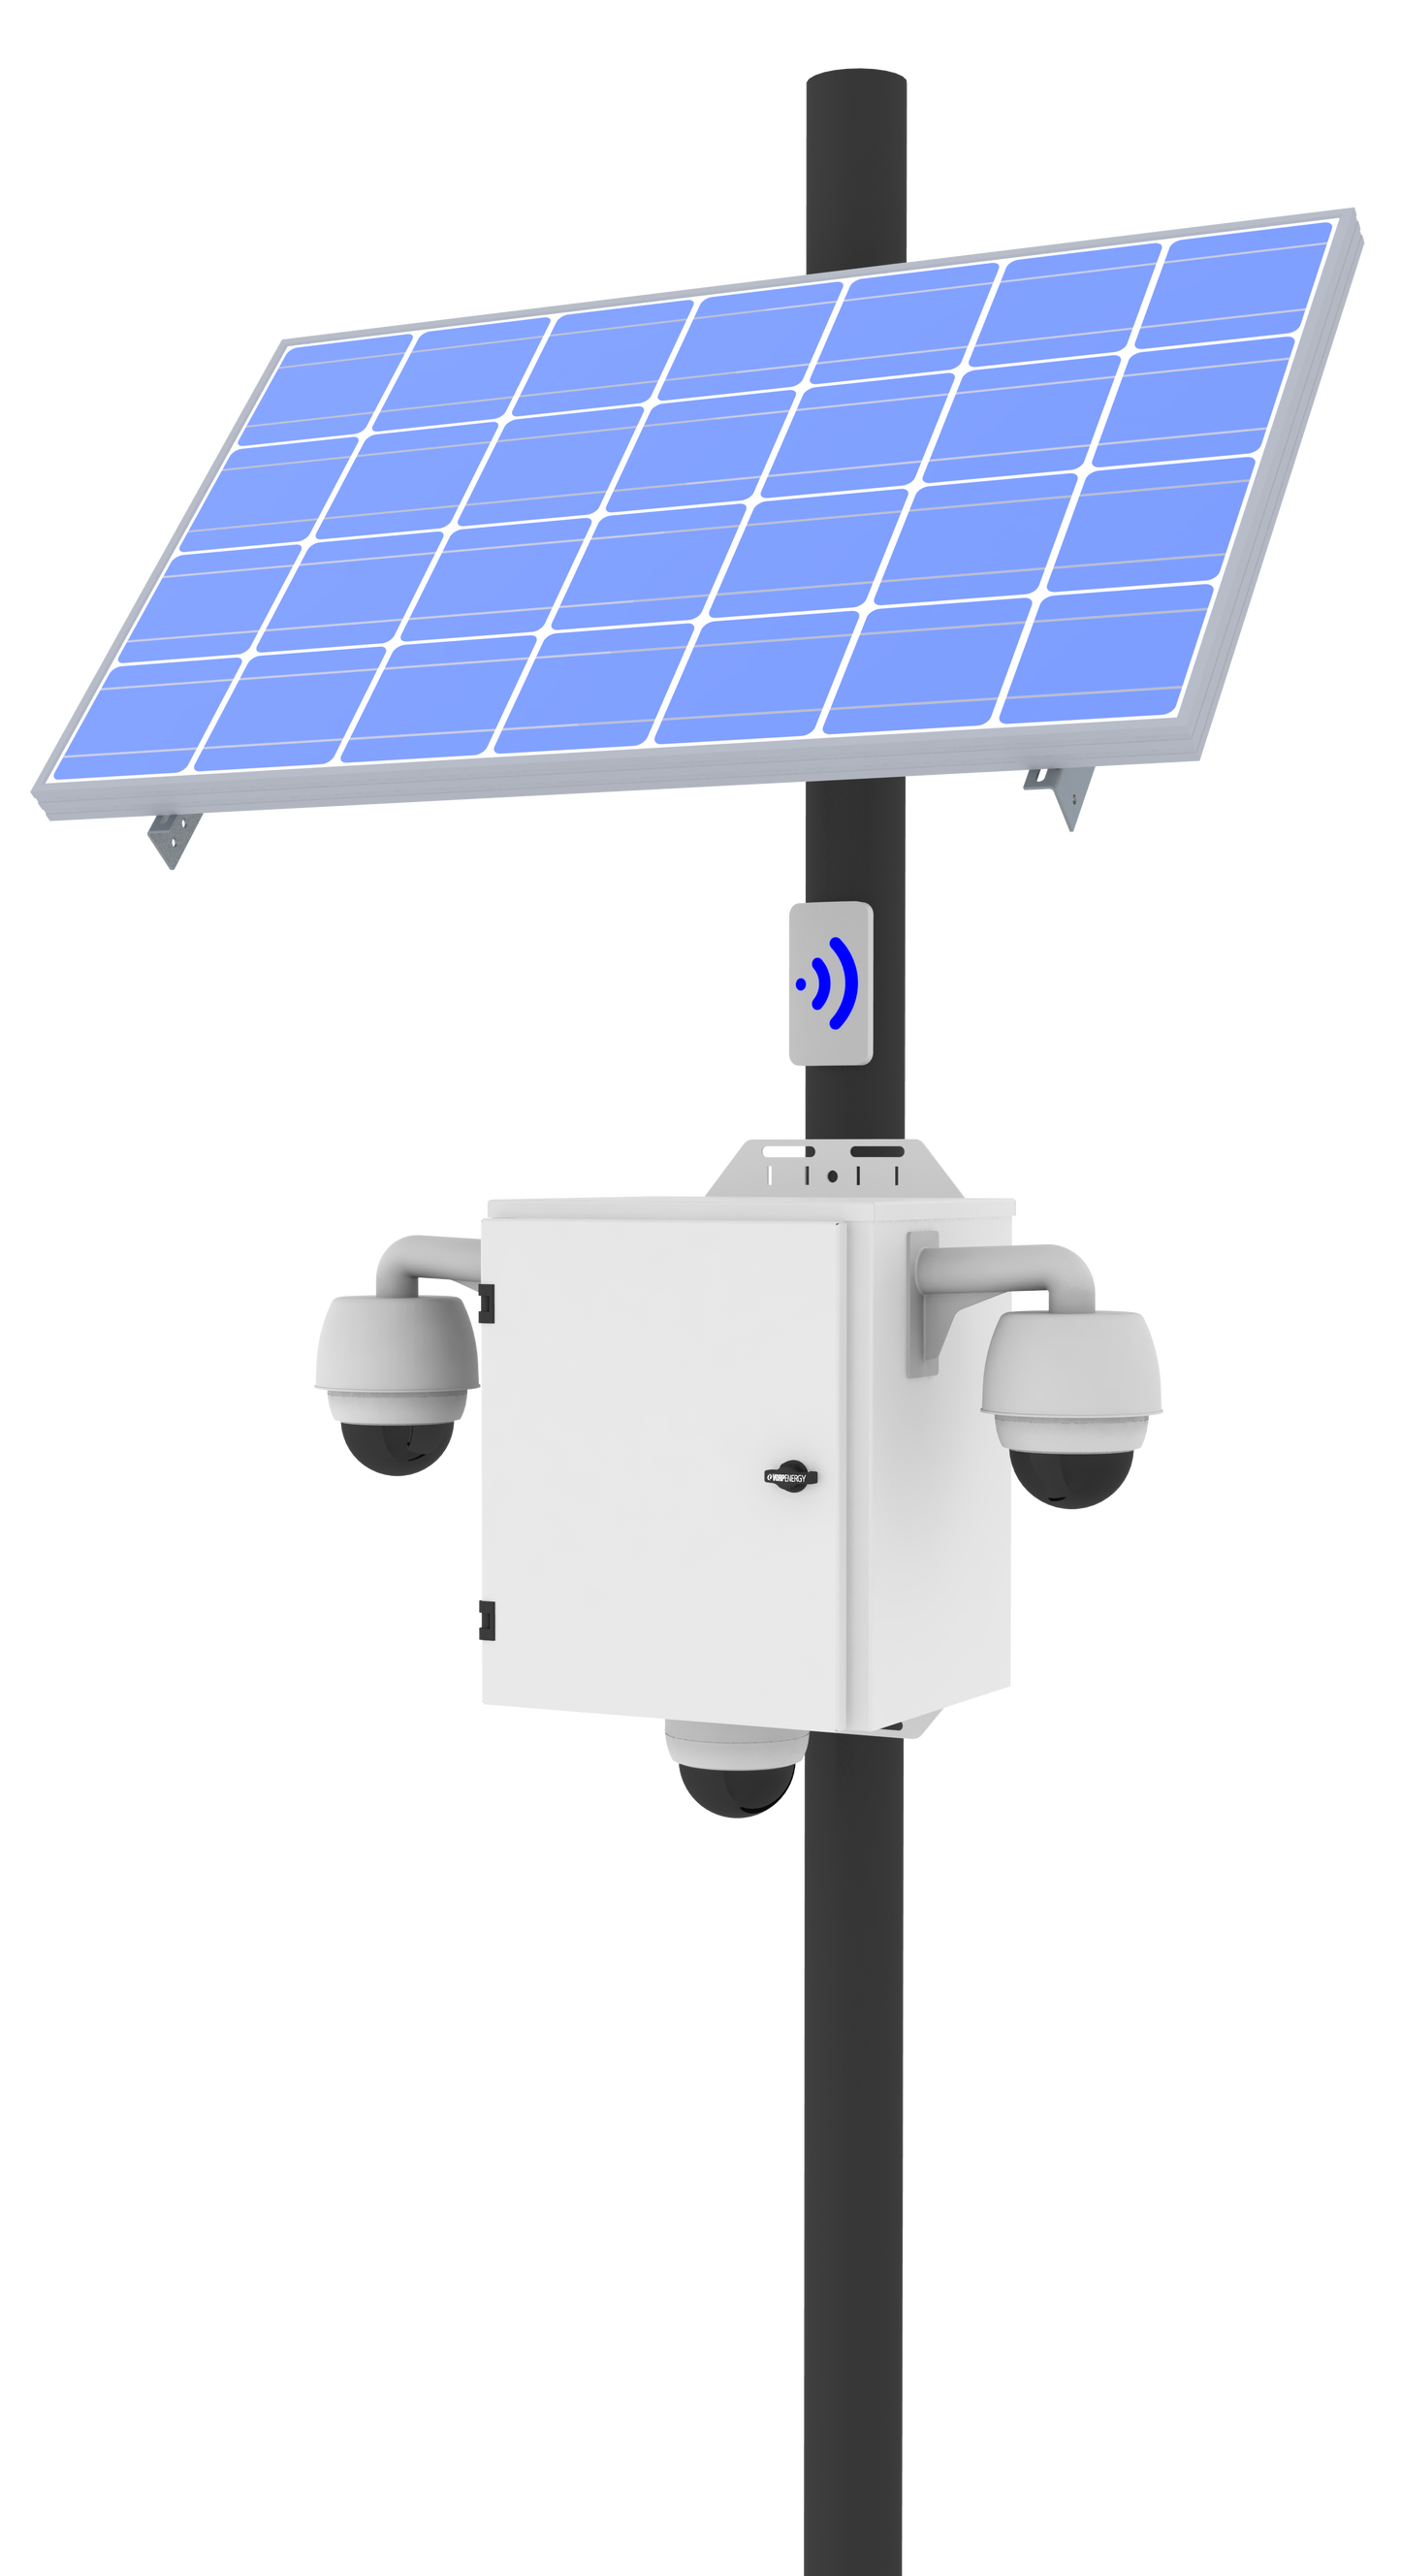 Solar Power Kits for Video Surveillance and Wireless Communications